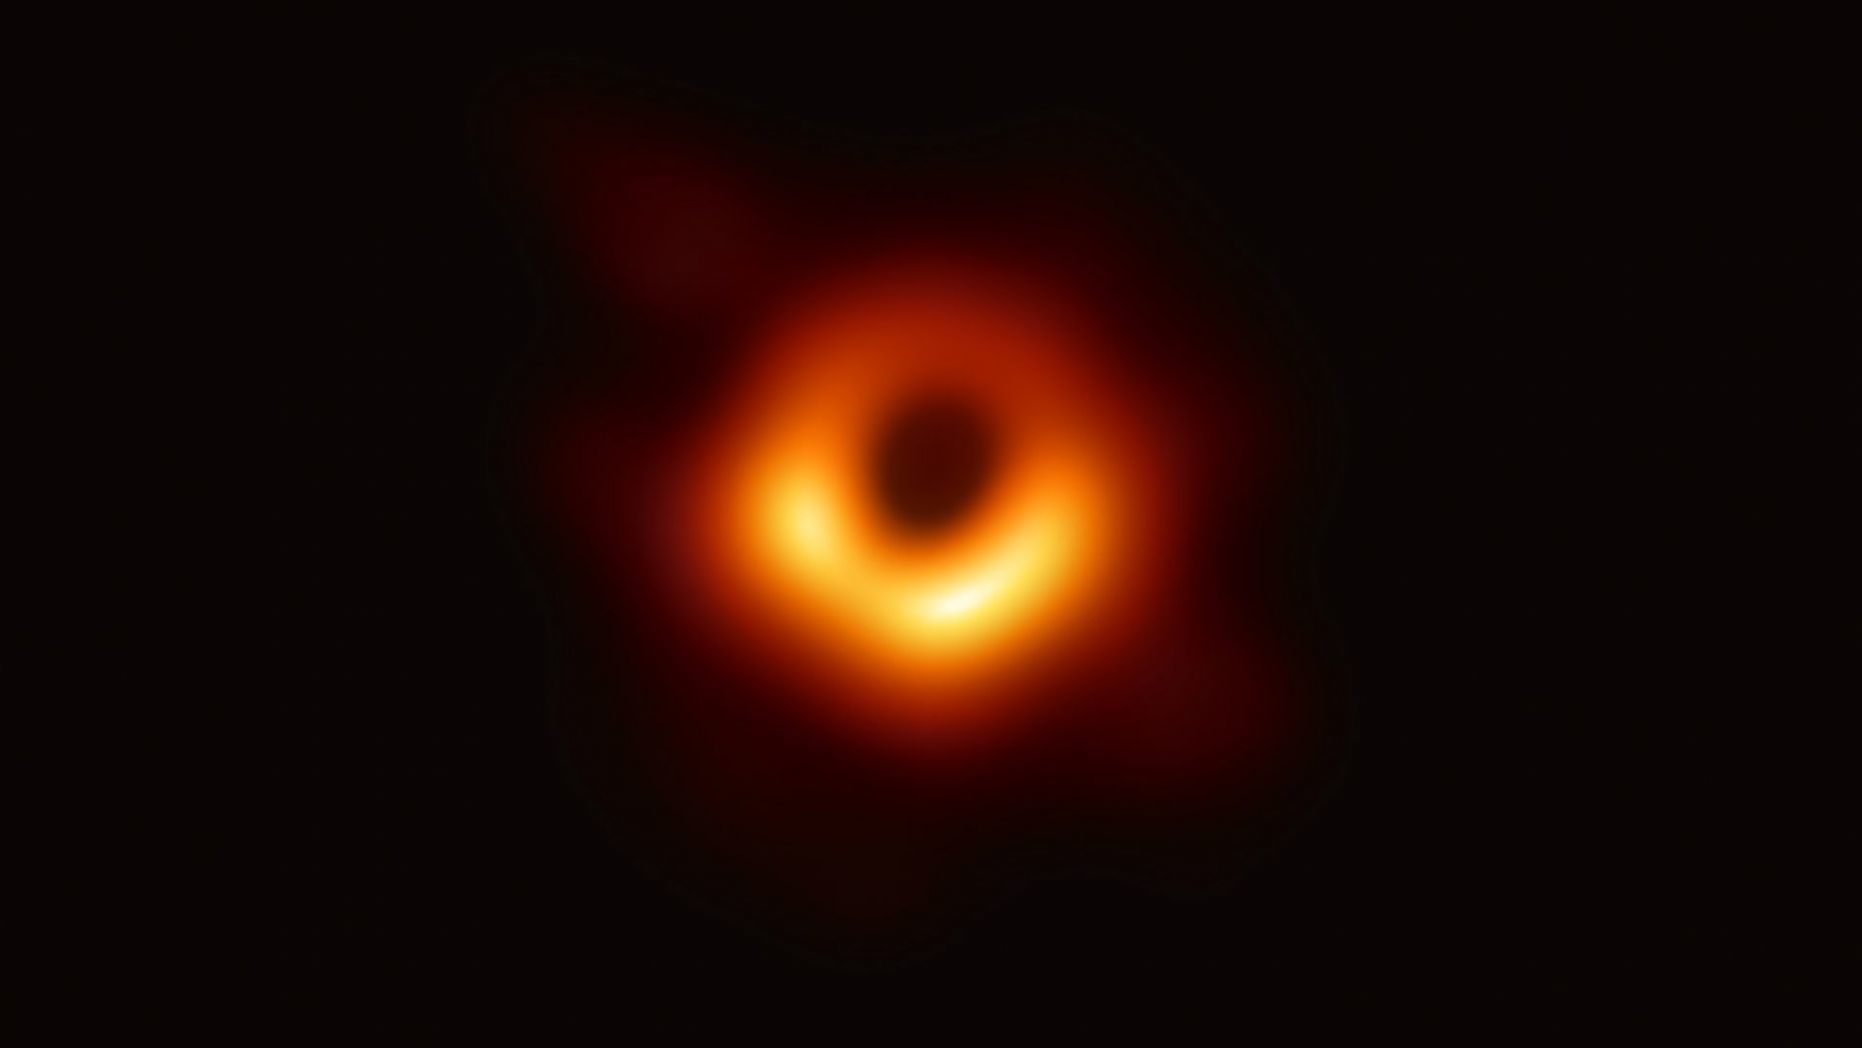 Black Hole First Pic Blank Meme Template